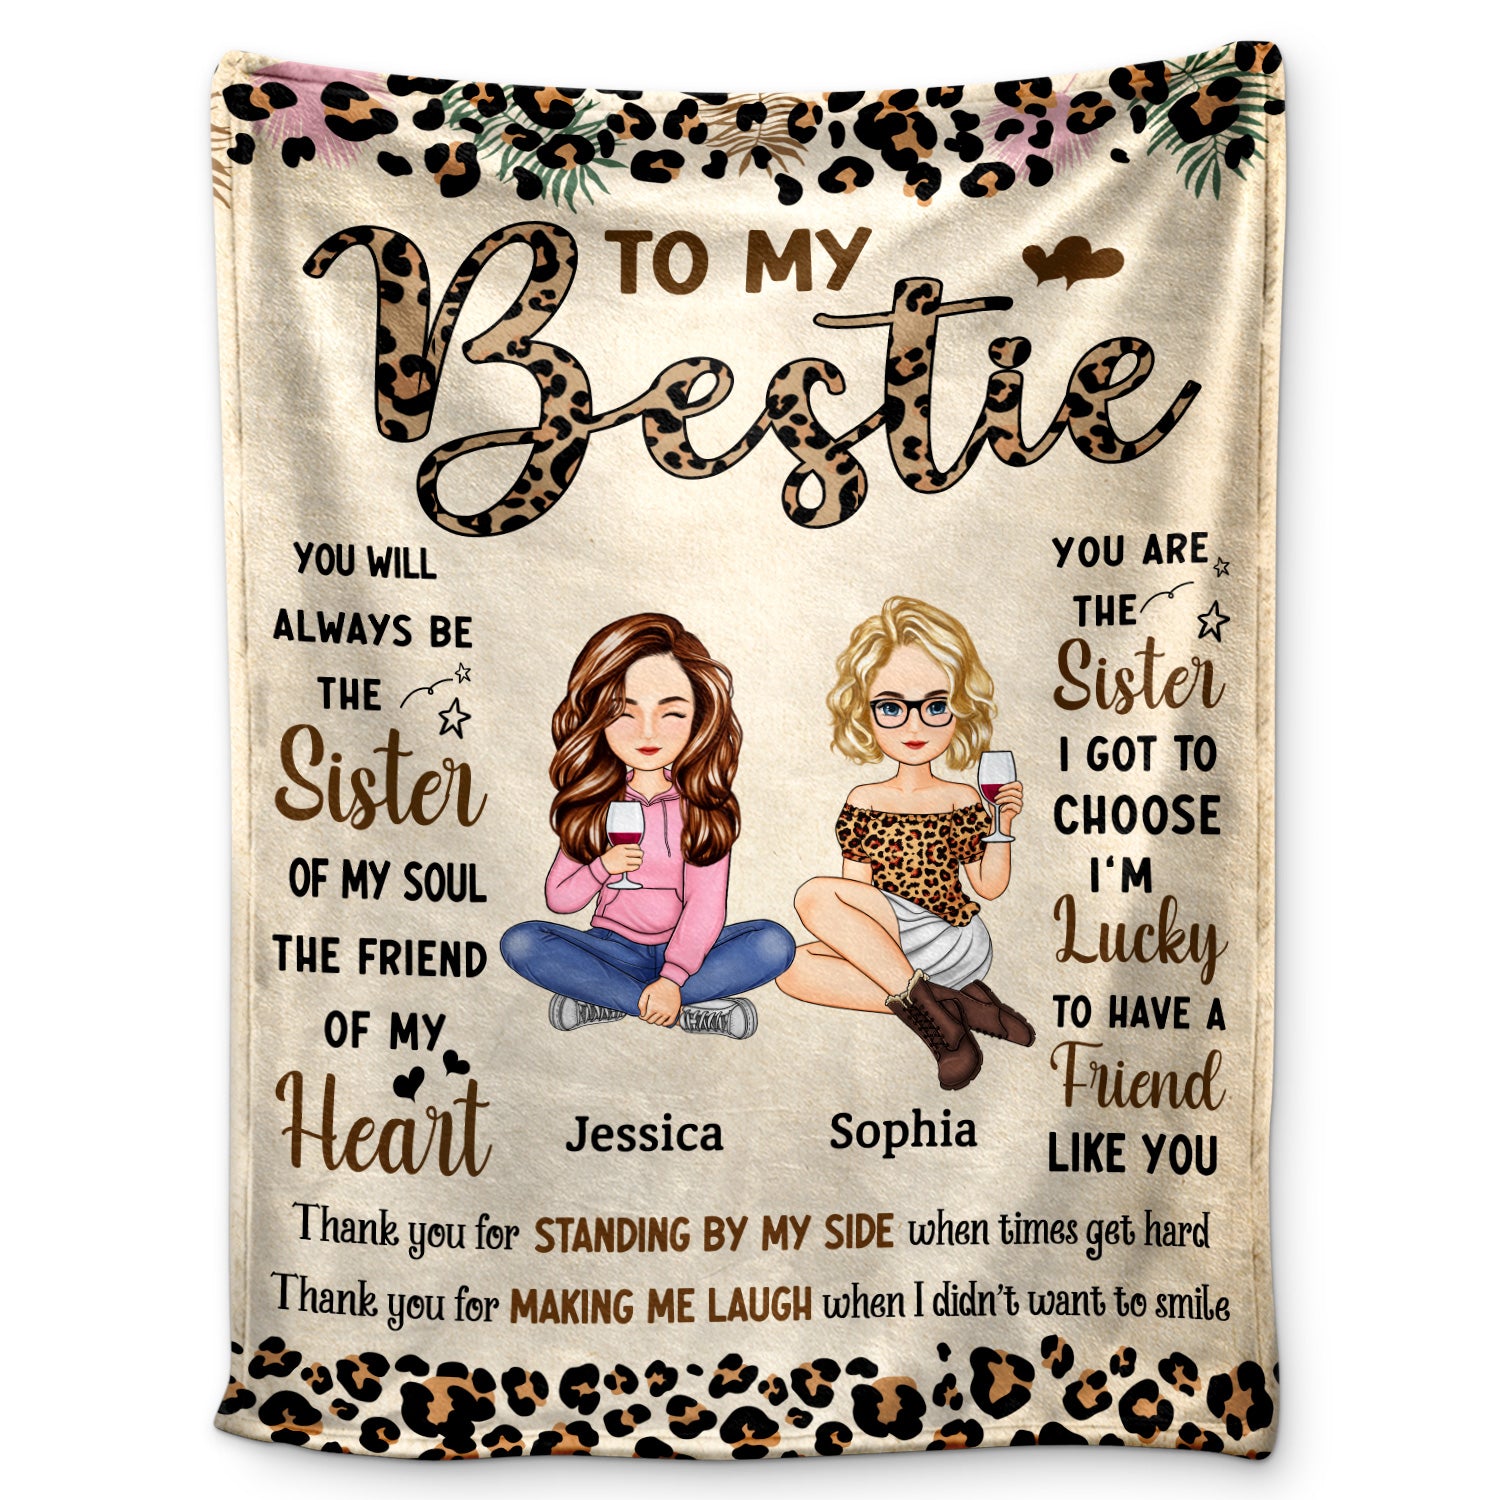 You Will Always Be The Sister Of My Soul - Gift For Besties, Best Friends - Personalized Fleece Blanket